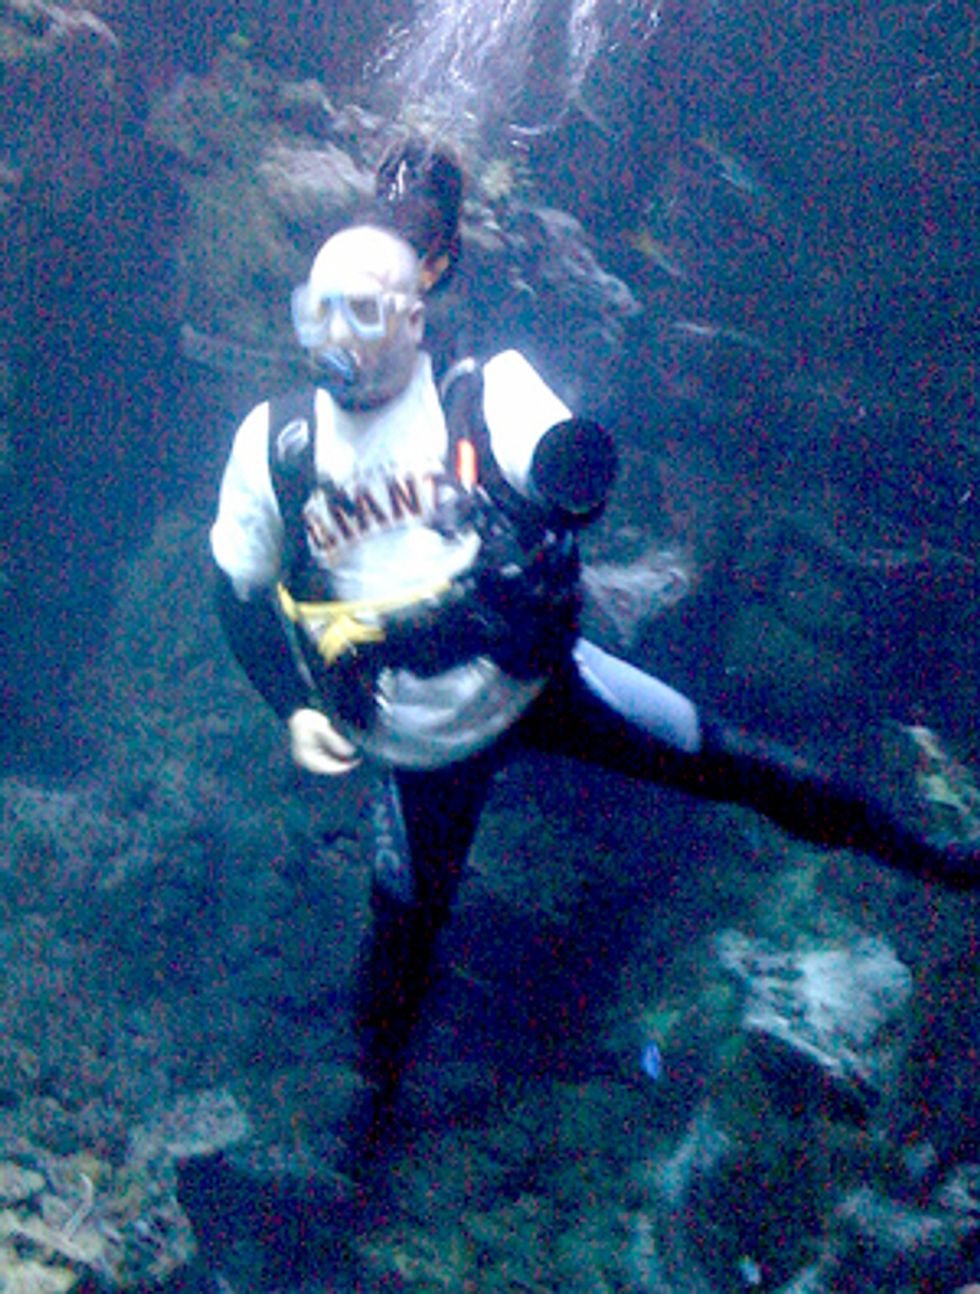 Scuba Diver Gets in on Giants Pride